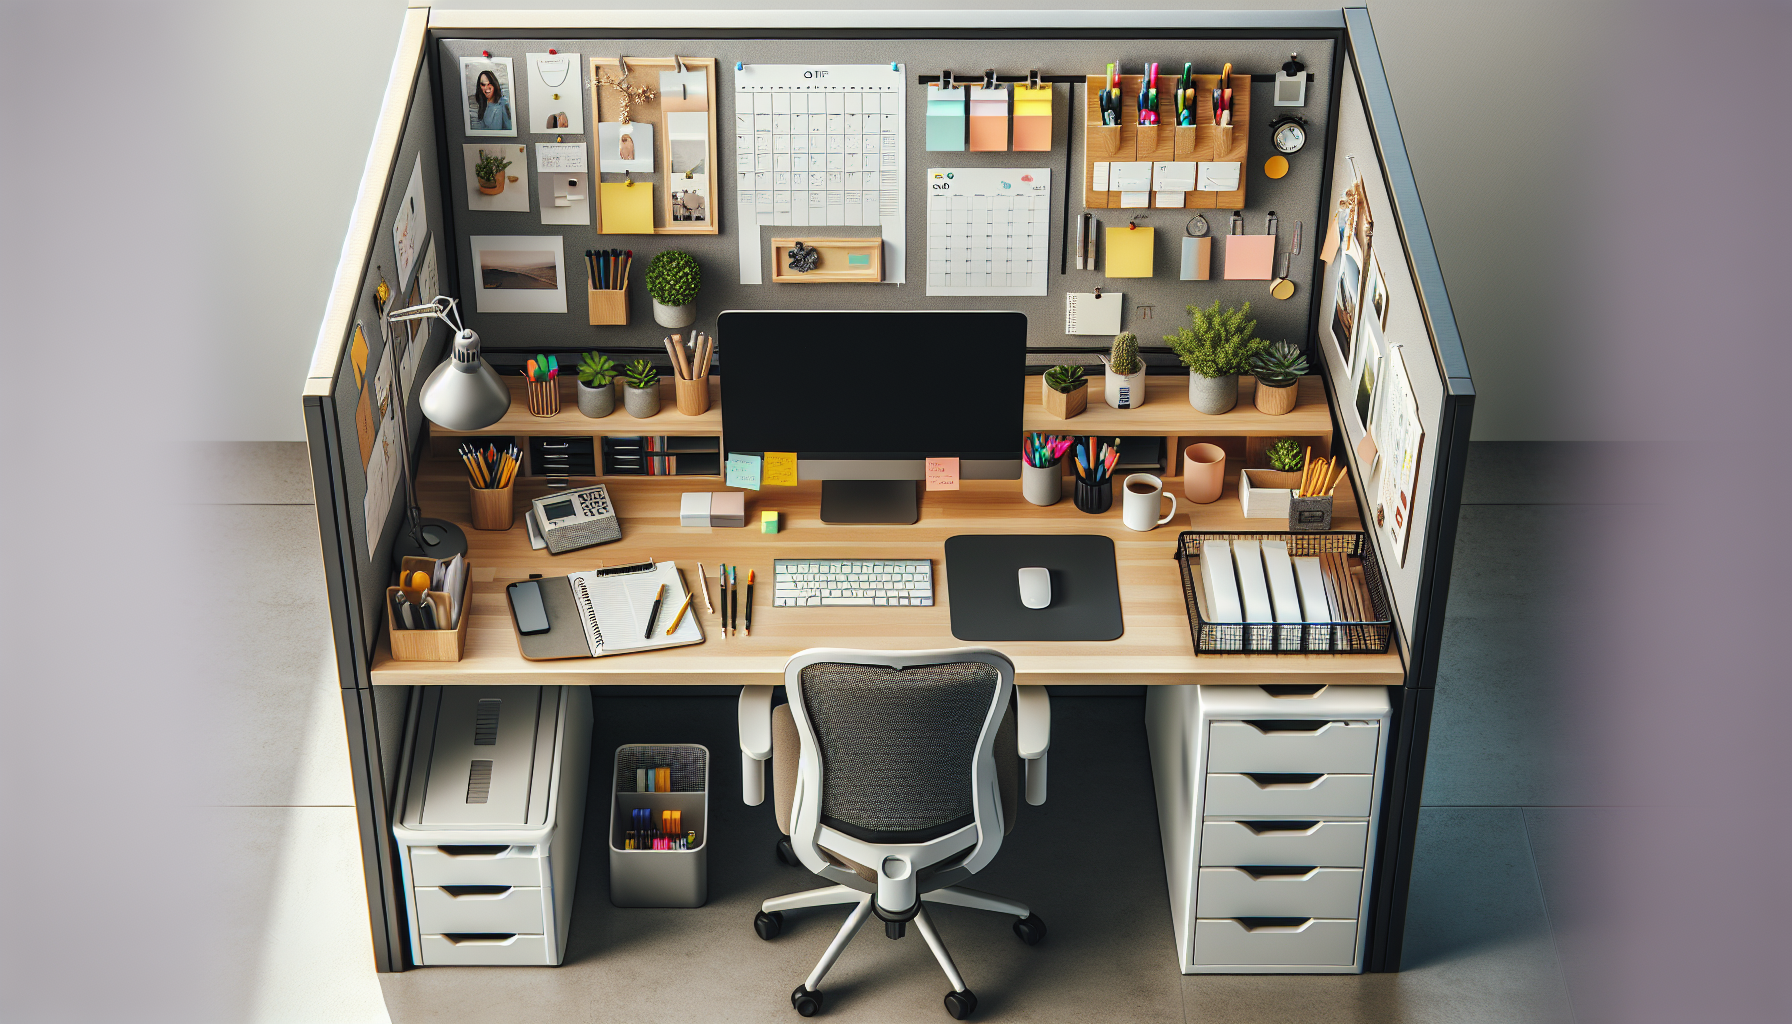 How To Organize Your Desk Office Or Cubicle At Work?